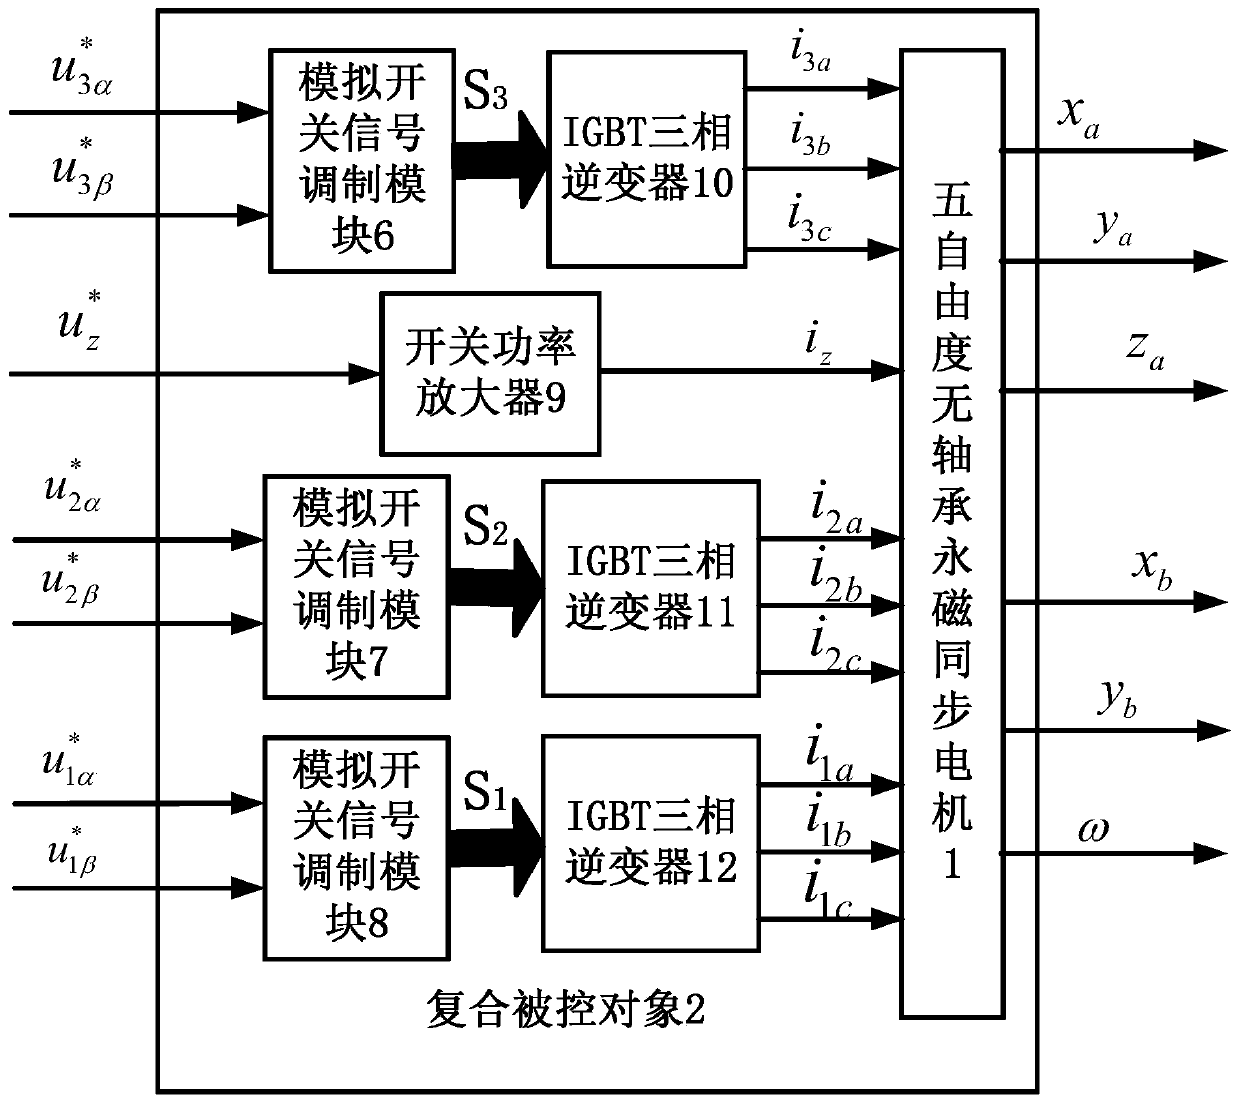 Five degrees of freedom bearingless permanent magnet synchronous motor fuzzy neural network decoupling controller